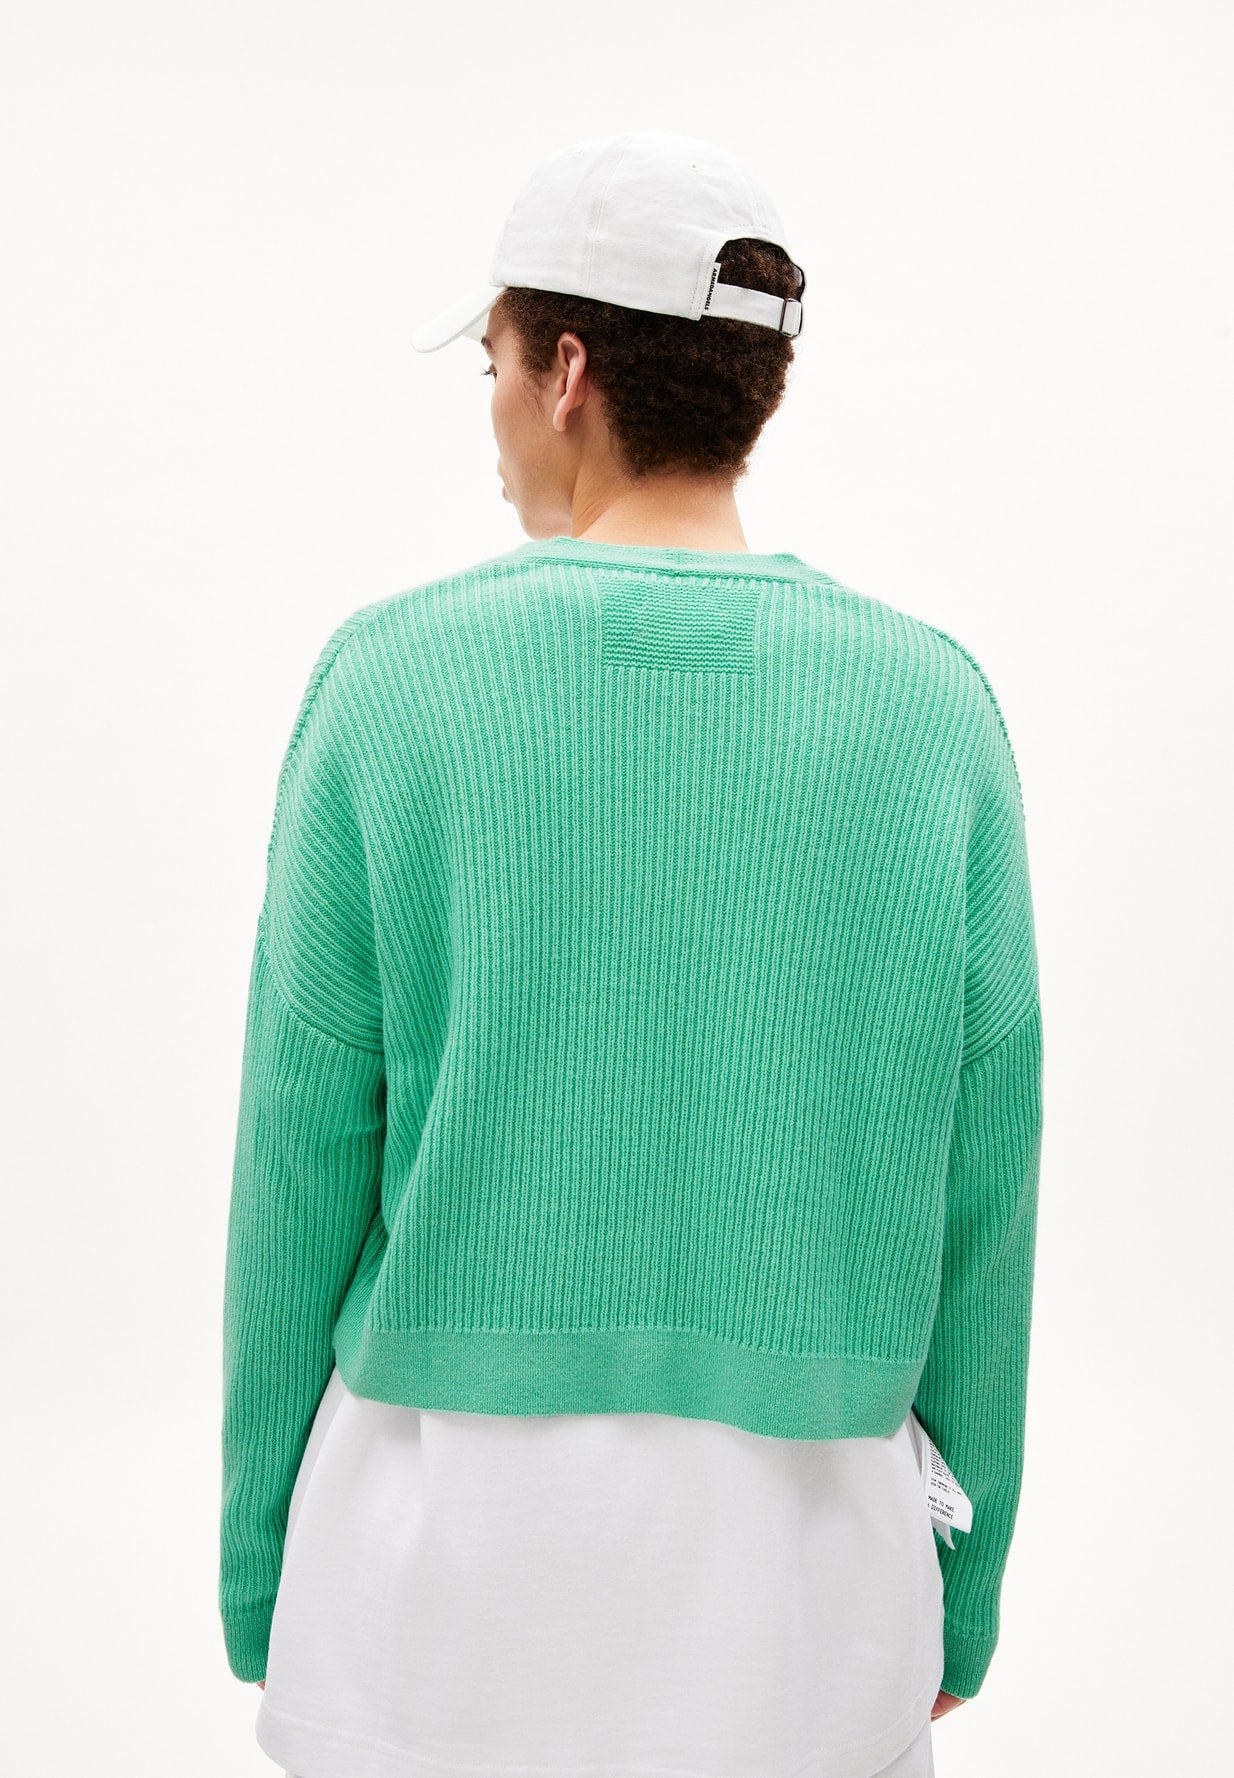 Armedangels - DAMIRAA SOFT Strick Pullover bright lime